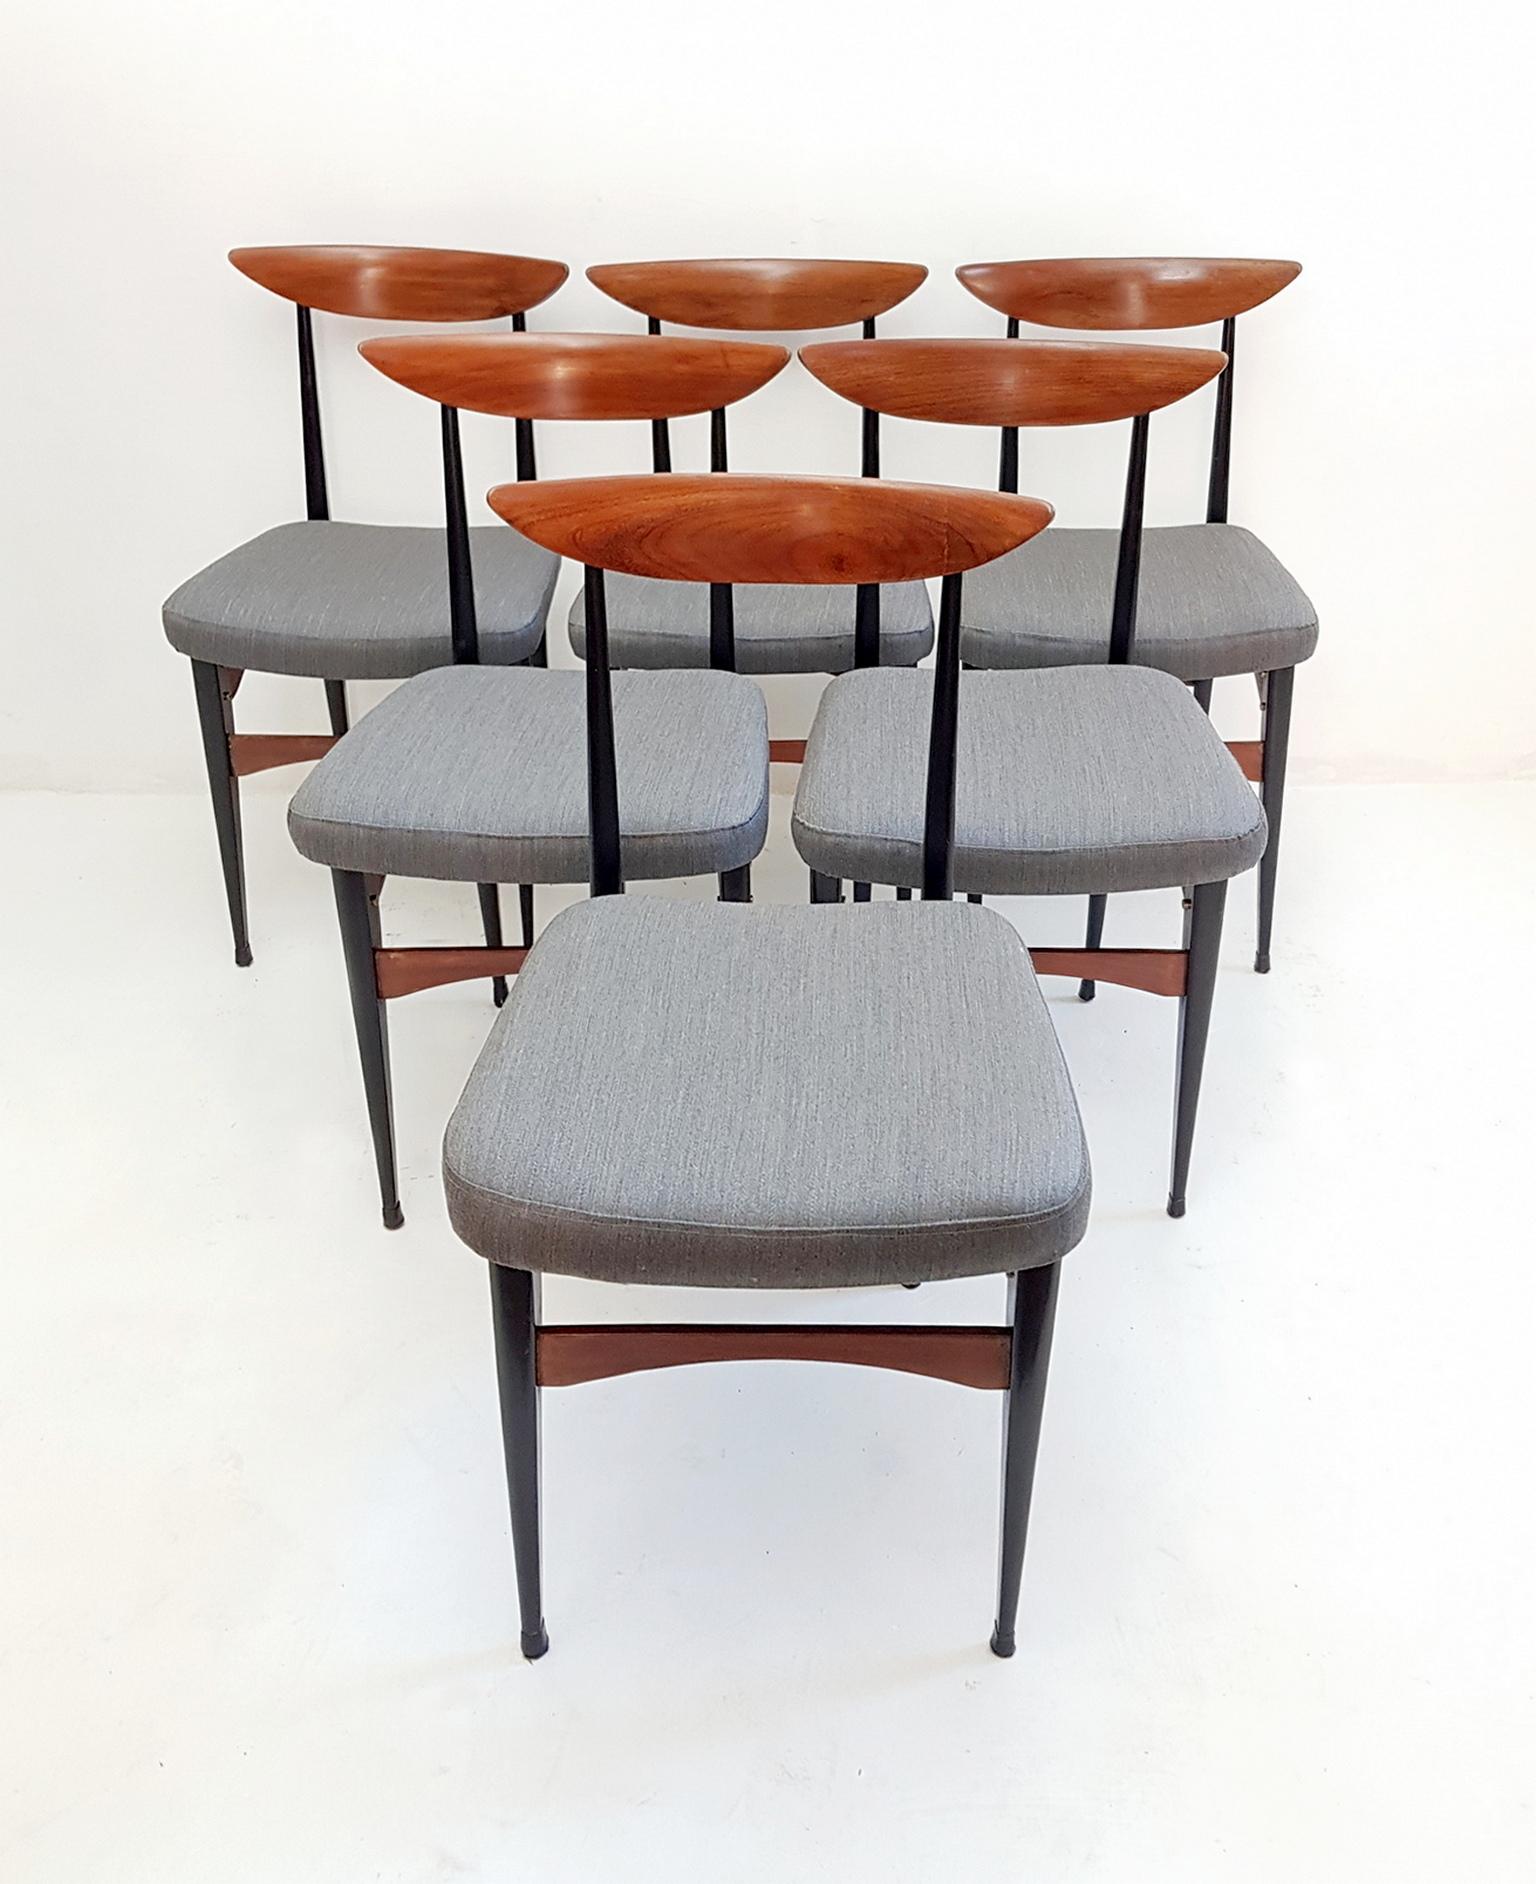 A set of six Italian dining chairs with a strict design in teak and blackened wood and reupholstered in gray Italian soft wool. The chairs are lightweight but very stabile and robust. The chairs have supreme craftsmanship and have recently been